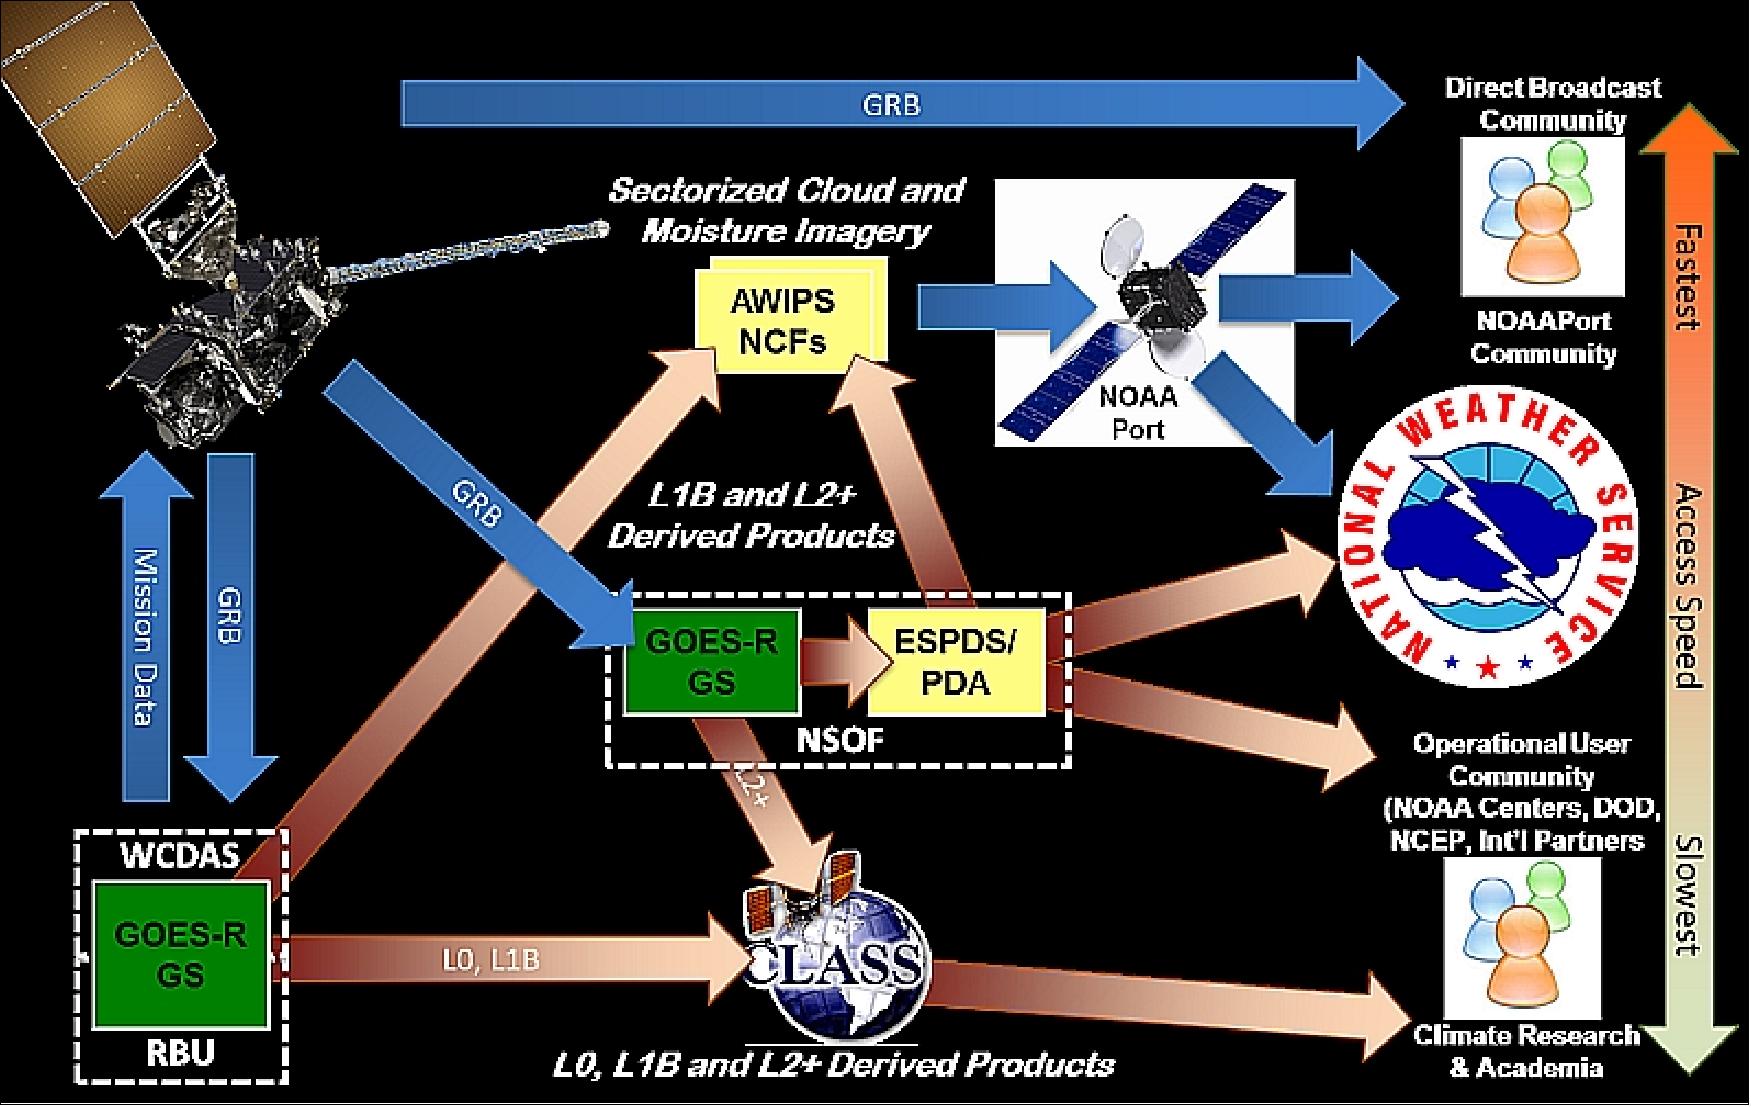 Figure 78: Overview of GOES-R data distribution (image credit: NOAA)